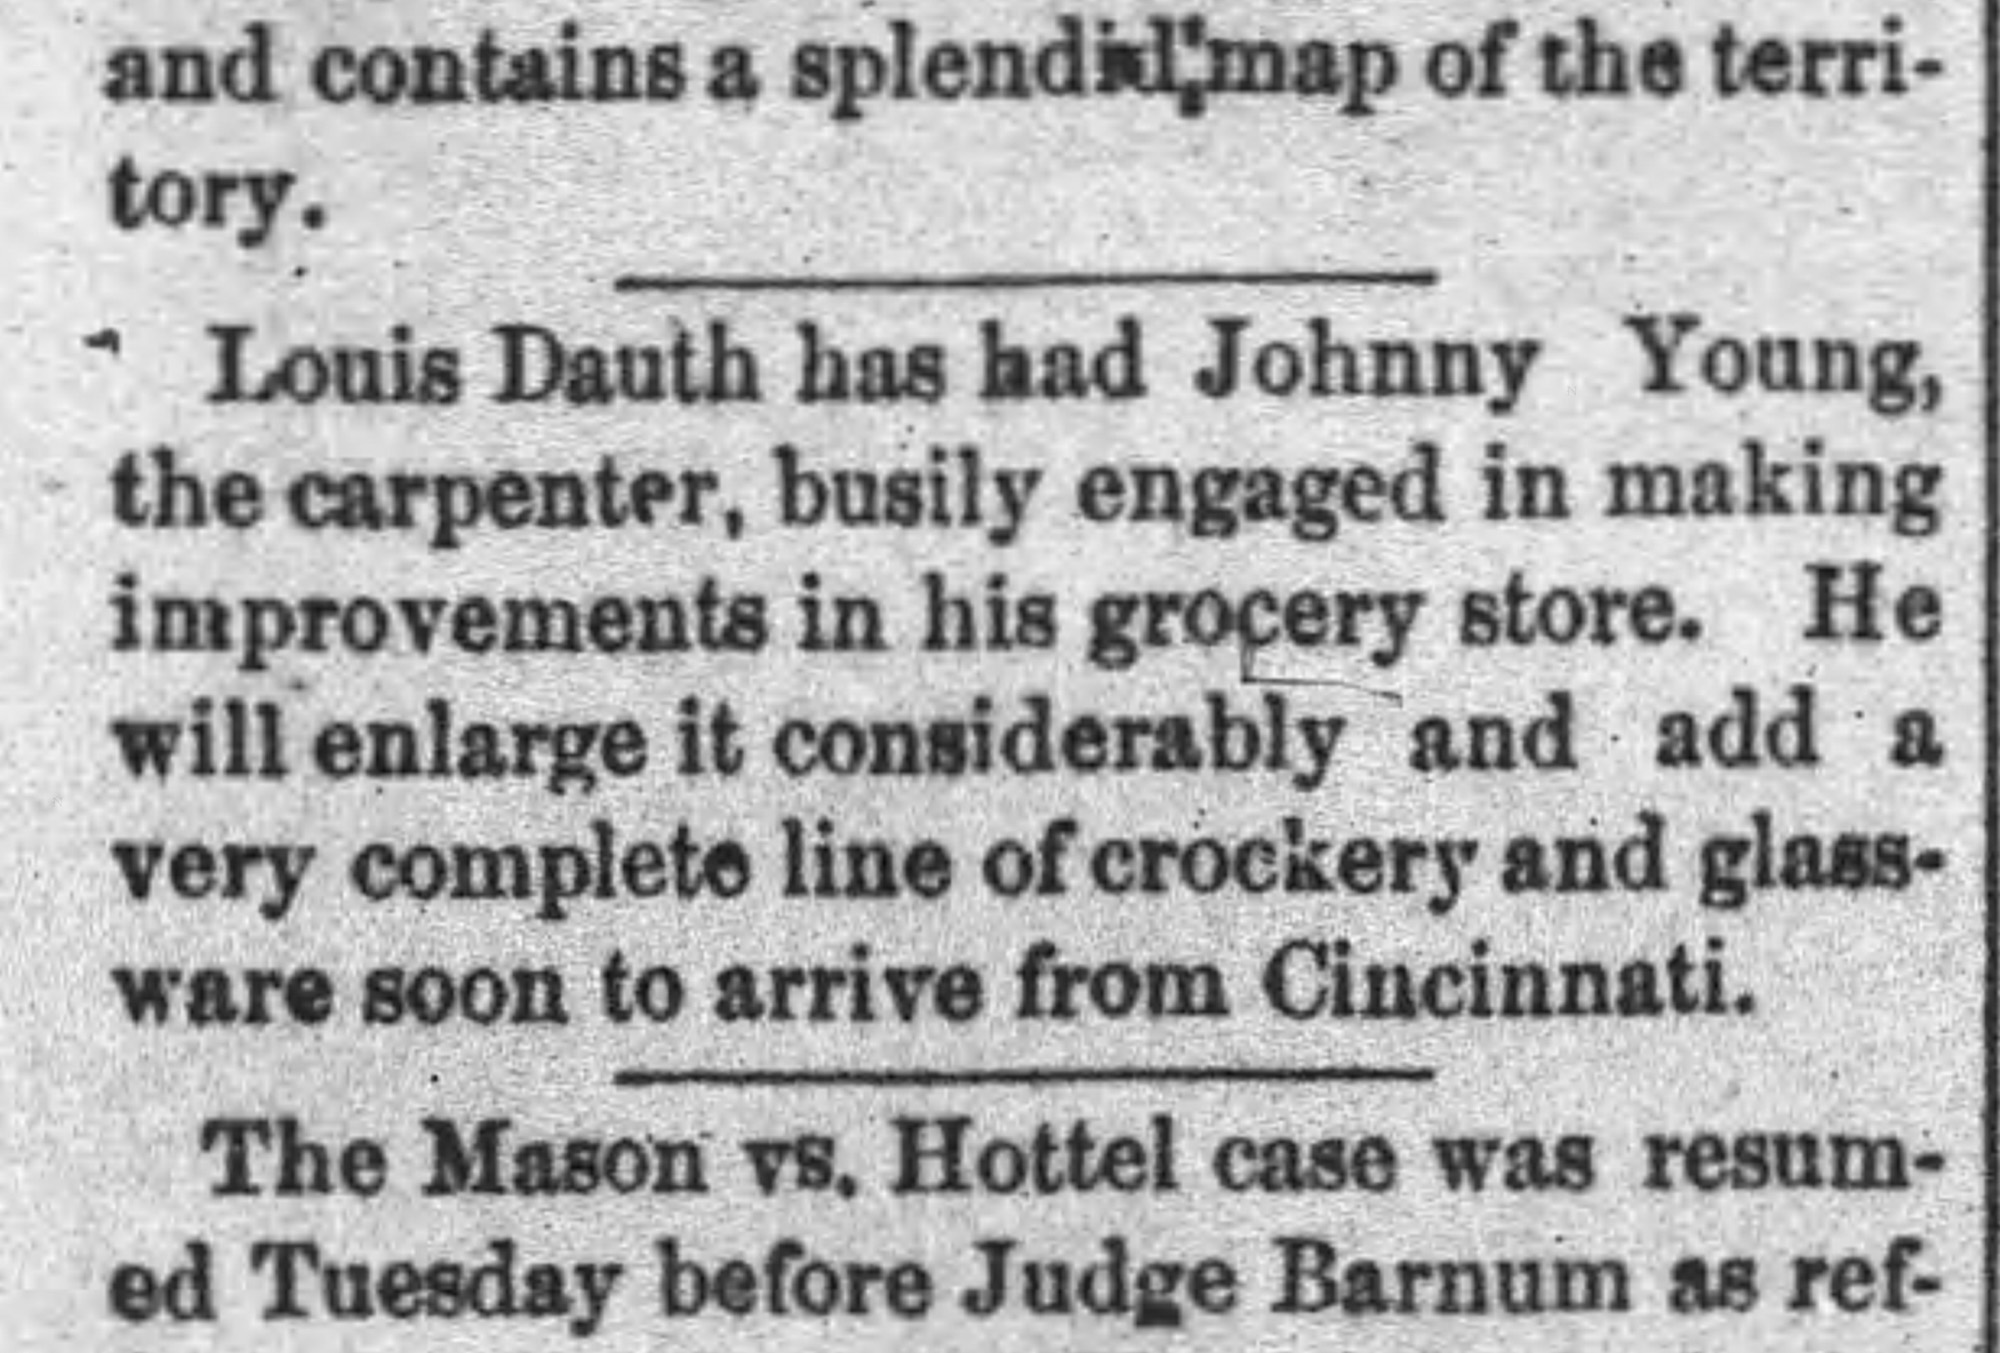 Dauth Family Archive - 1886-04-10 - The Fort Collins Express - Louis Dauth Expanding His Store